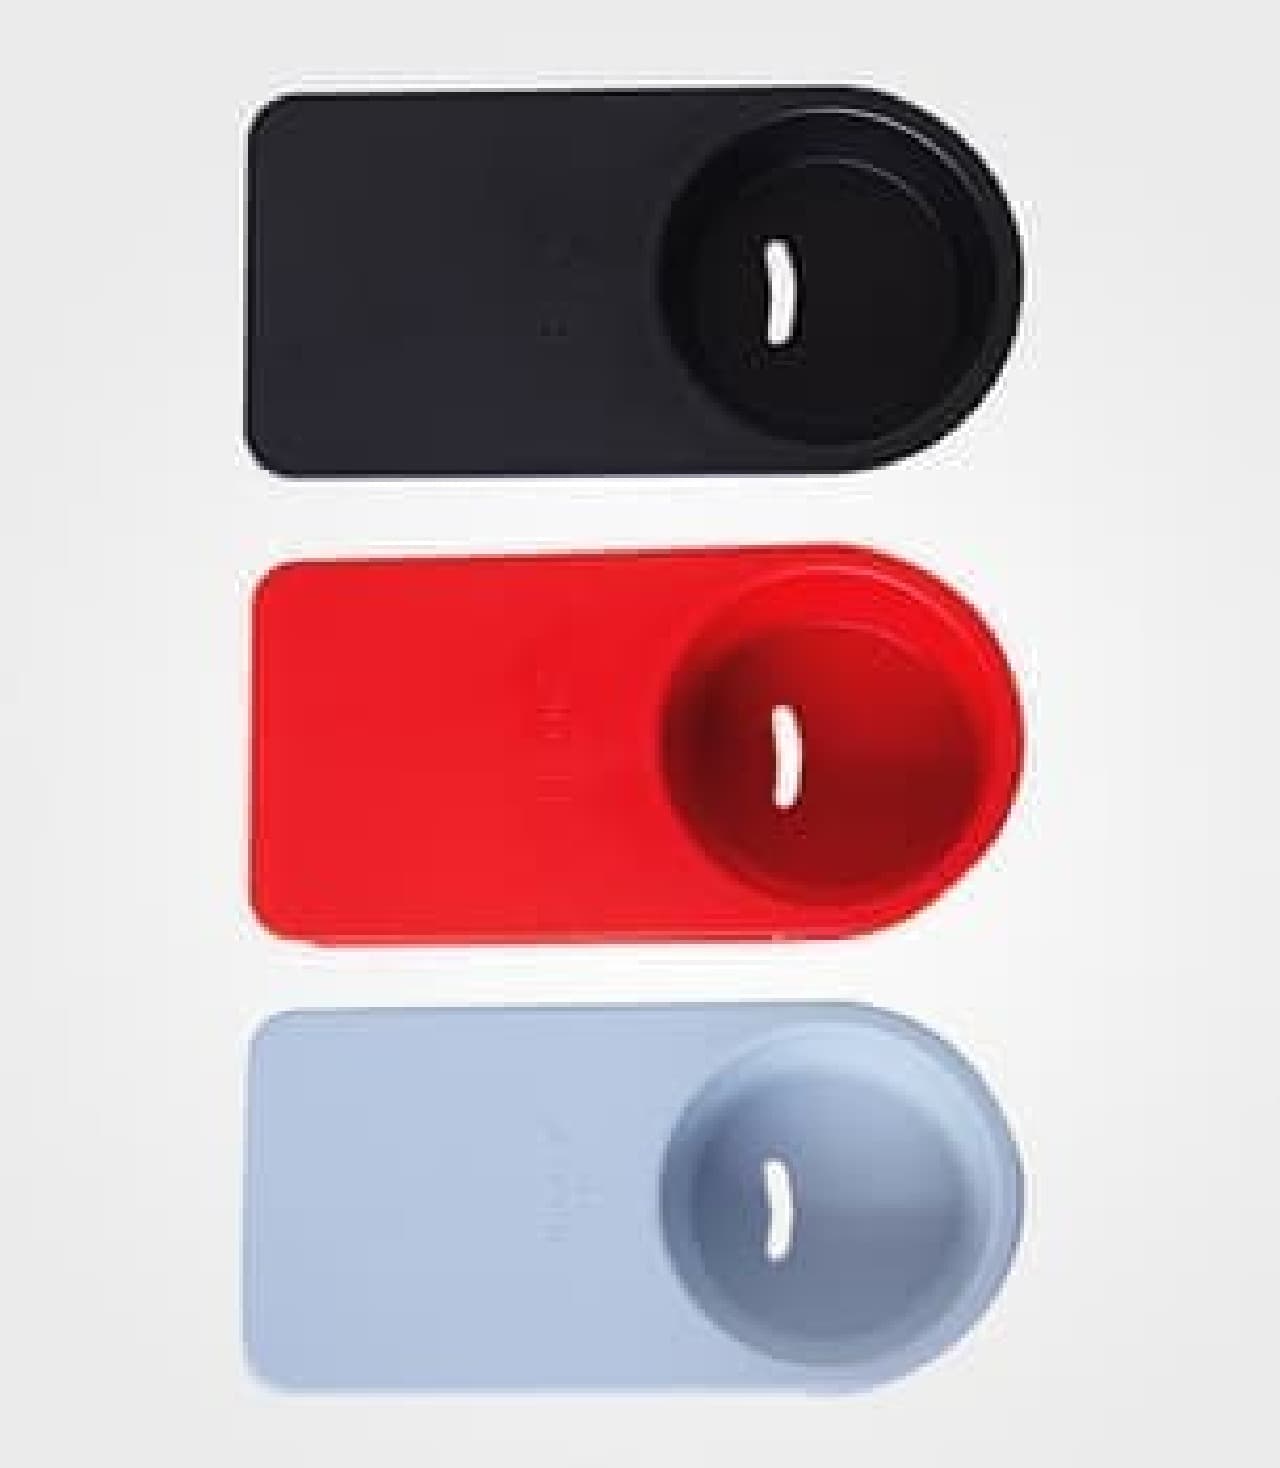 In addition to blue, you can choose from black, red, and white.